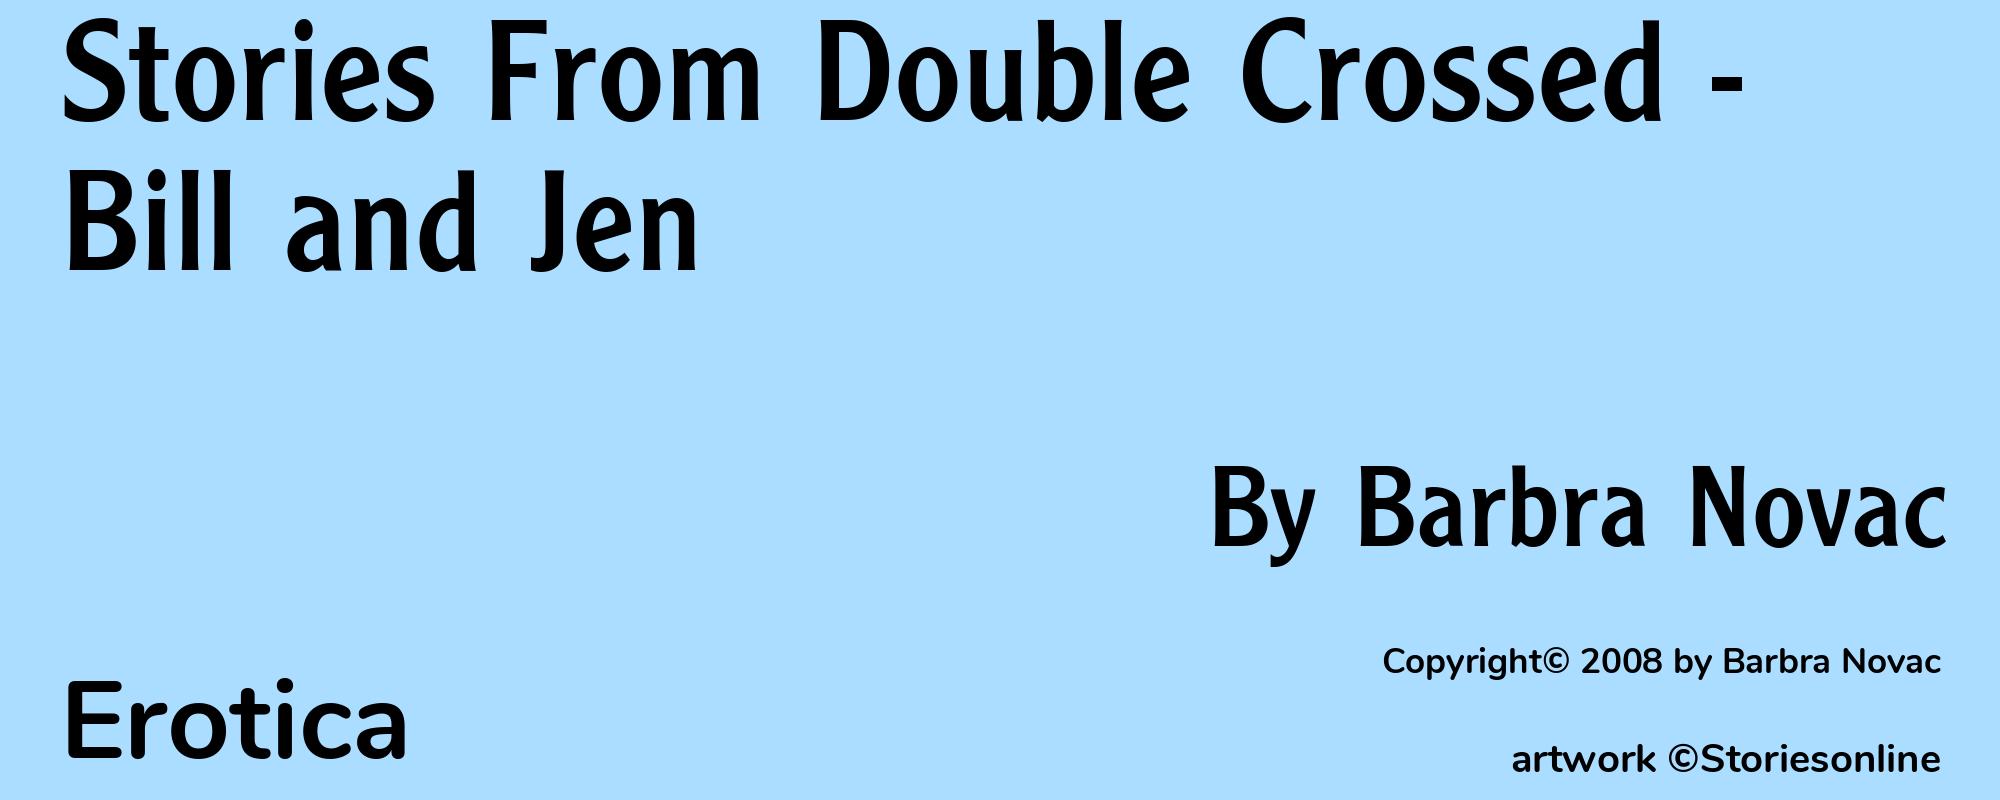 Stories From Double Crossed - Bill and Jen - Cover